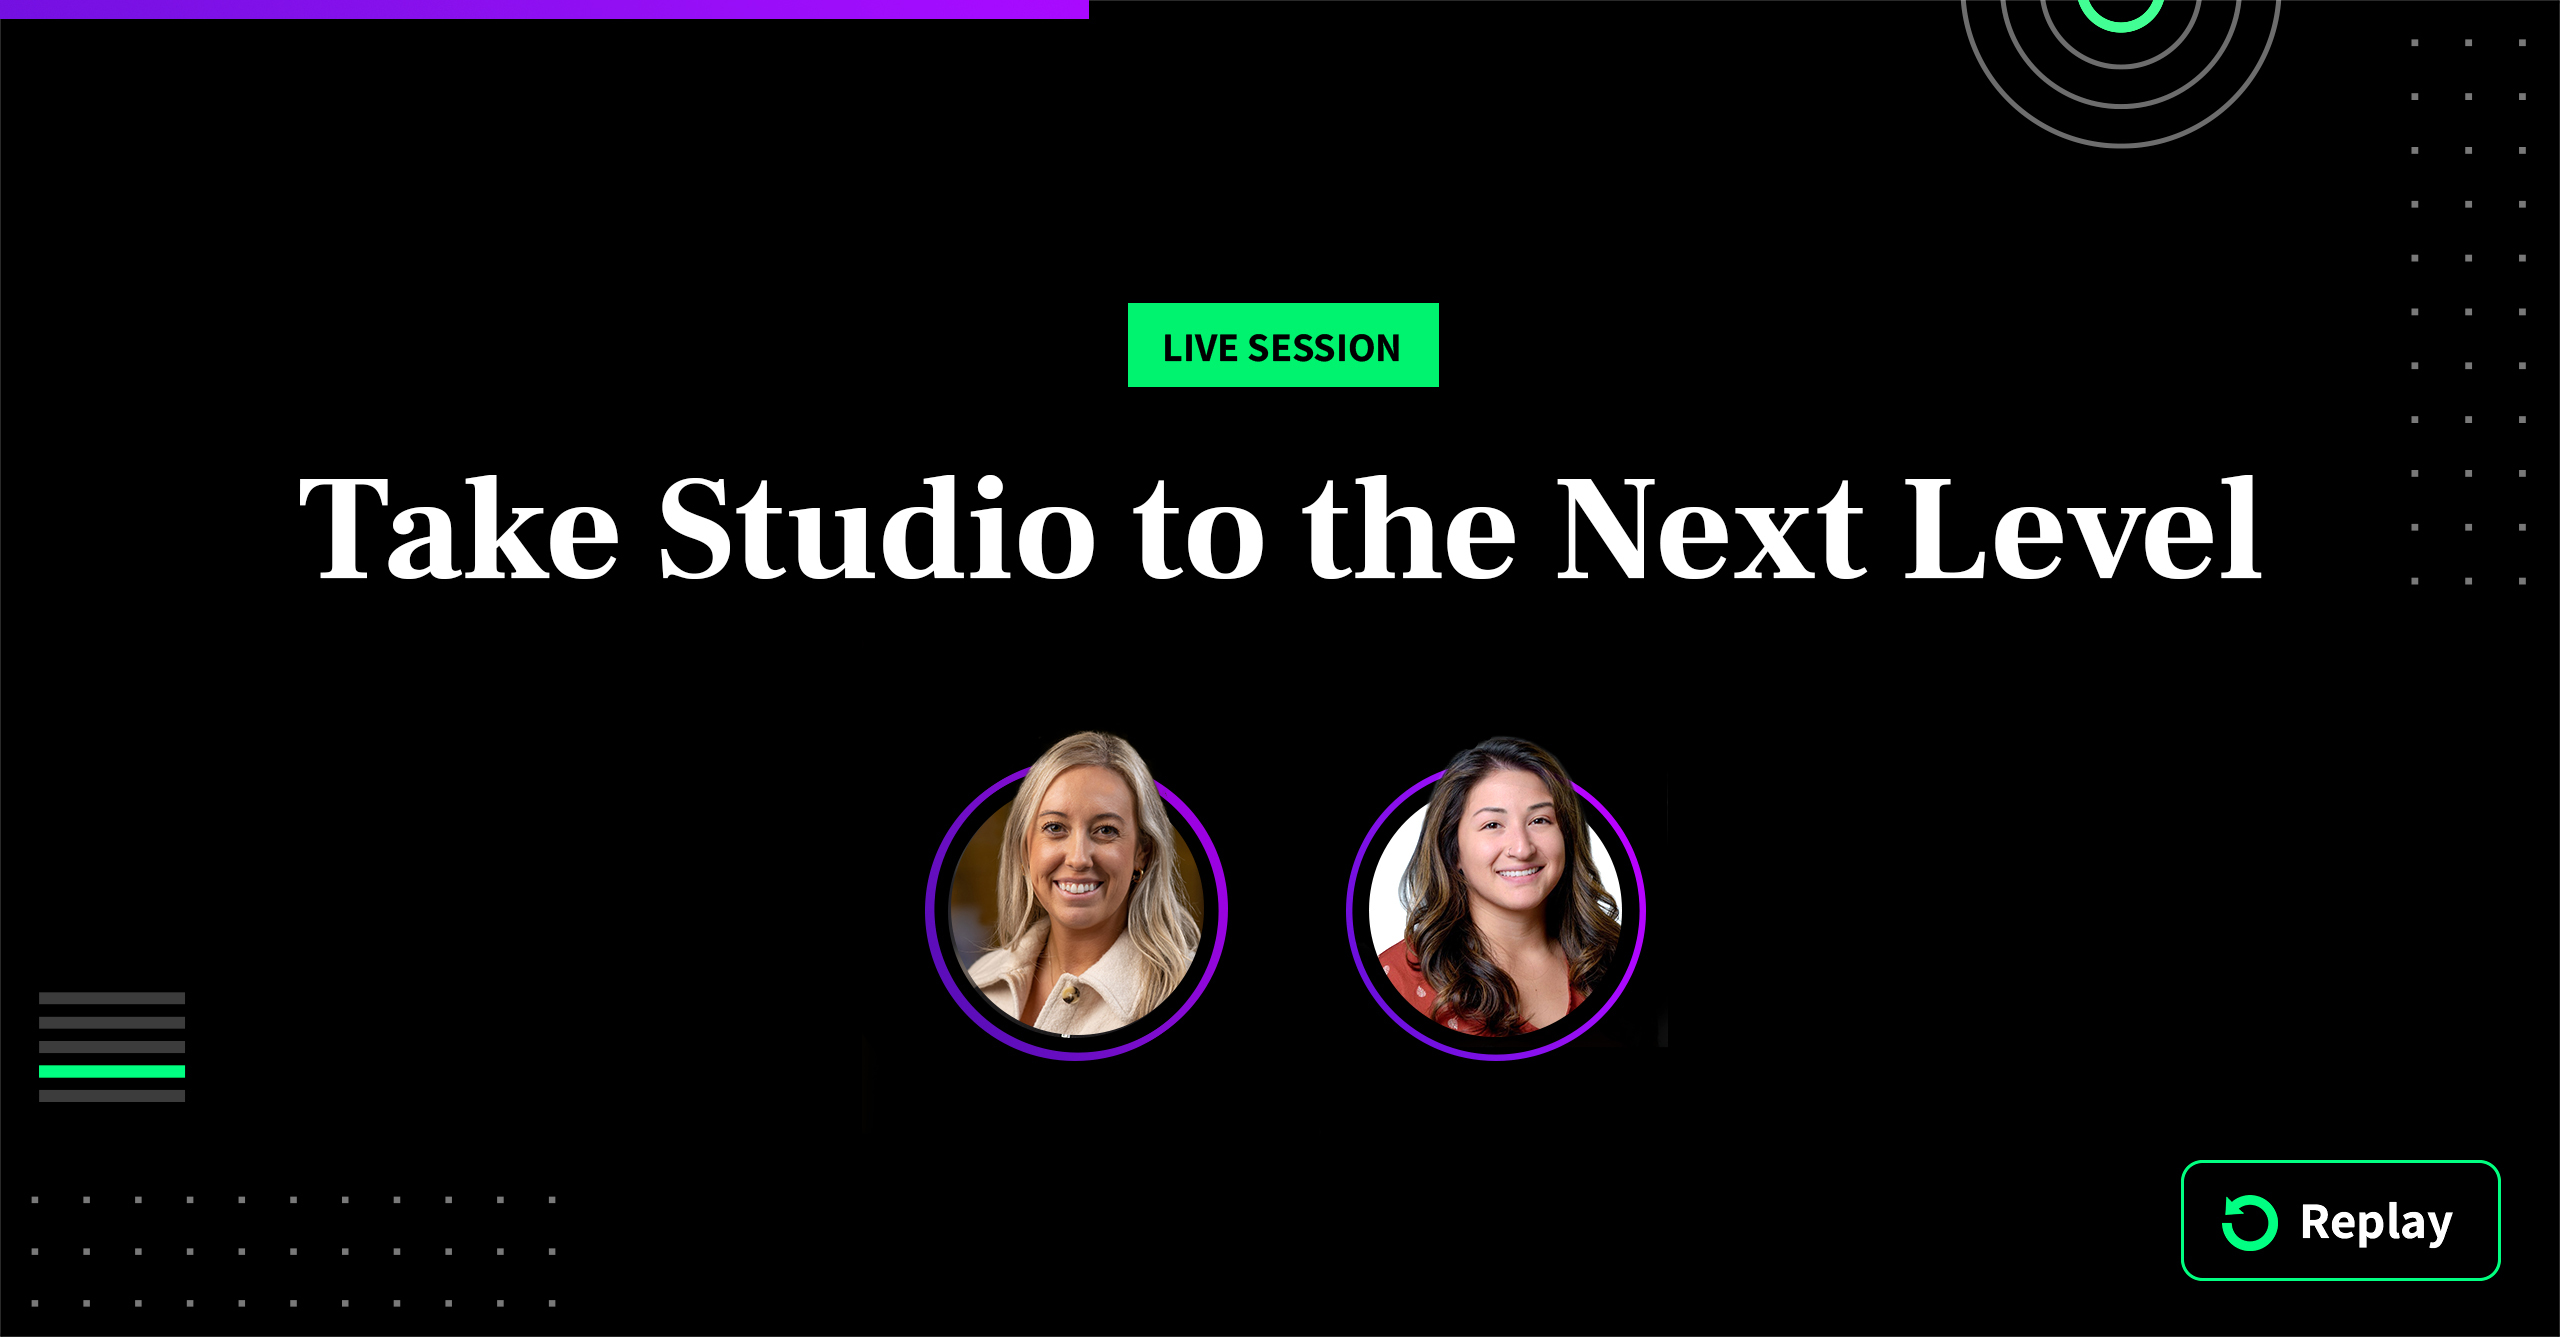 Replay of WellSaid Labs webinar about taking Studio to the next level